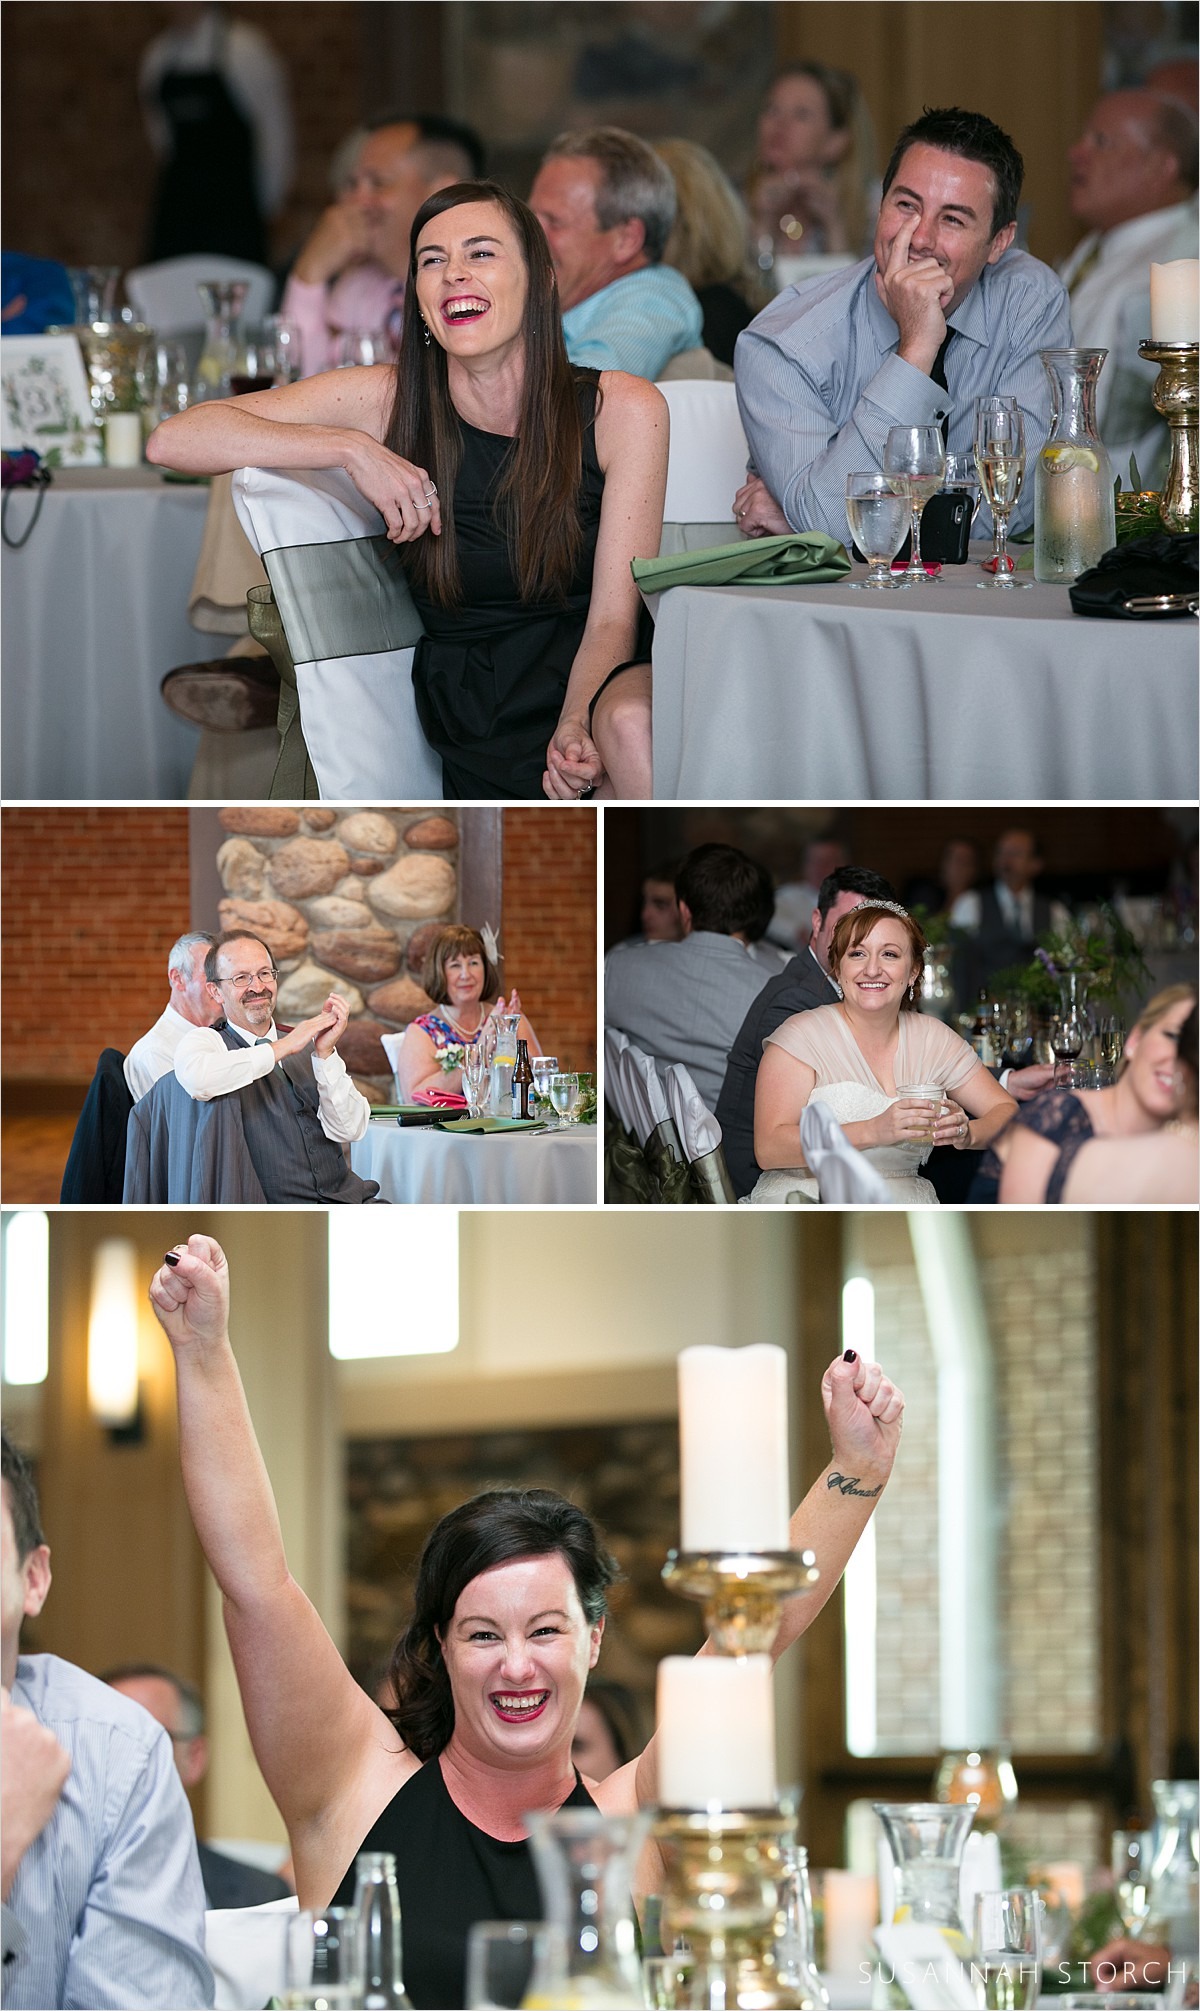 images of toasts during a wedding reception